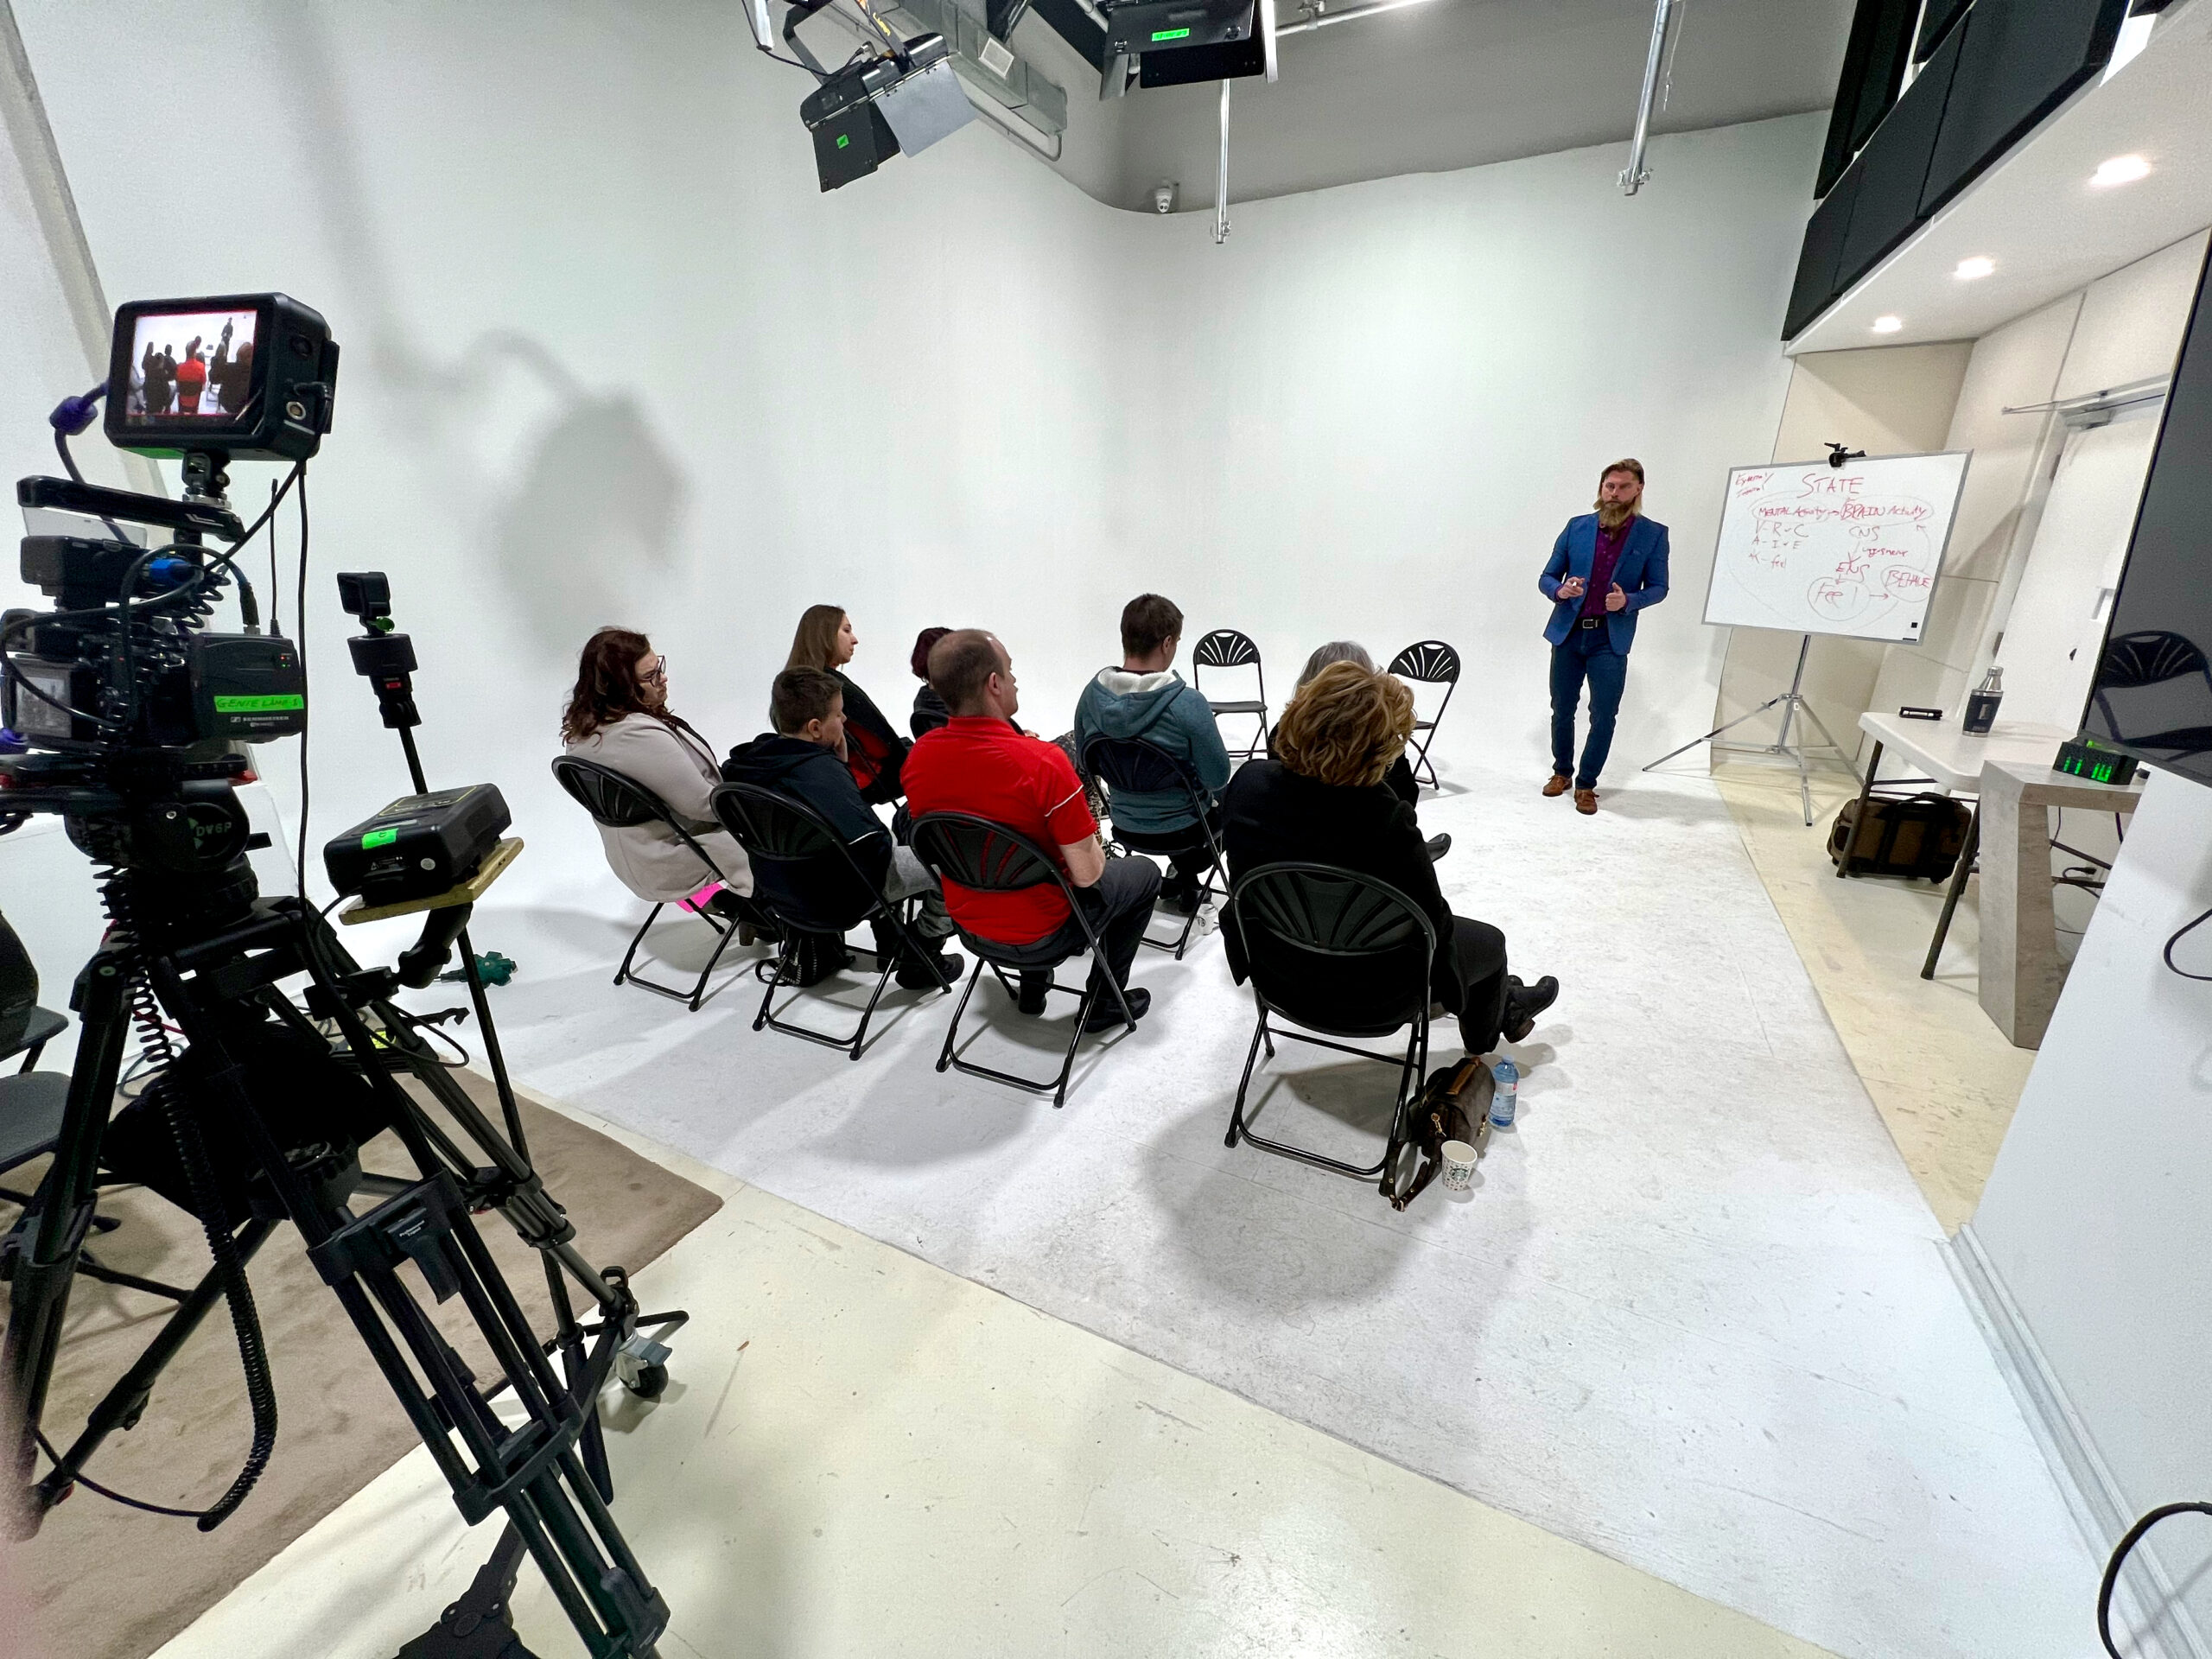 Chris Wyllie NLP lecture video production in studio by Genie Lamp Studios, Markham.